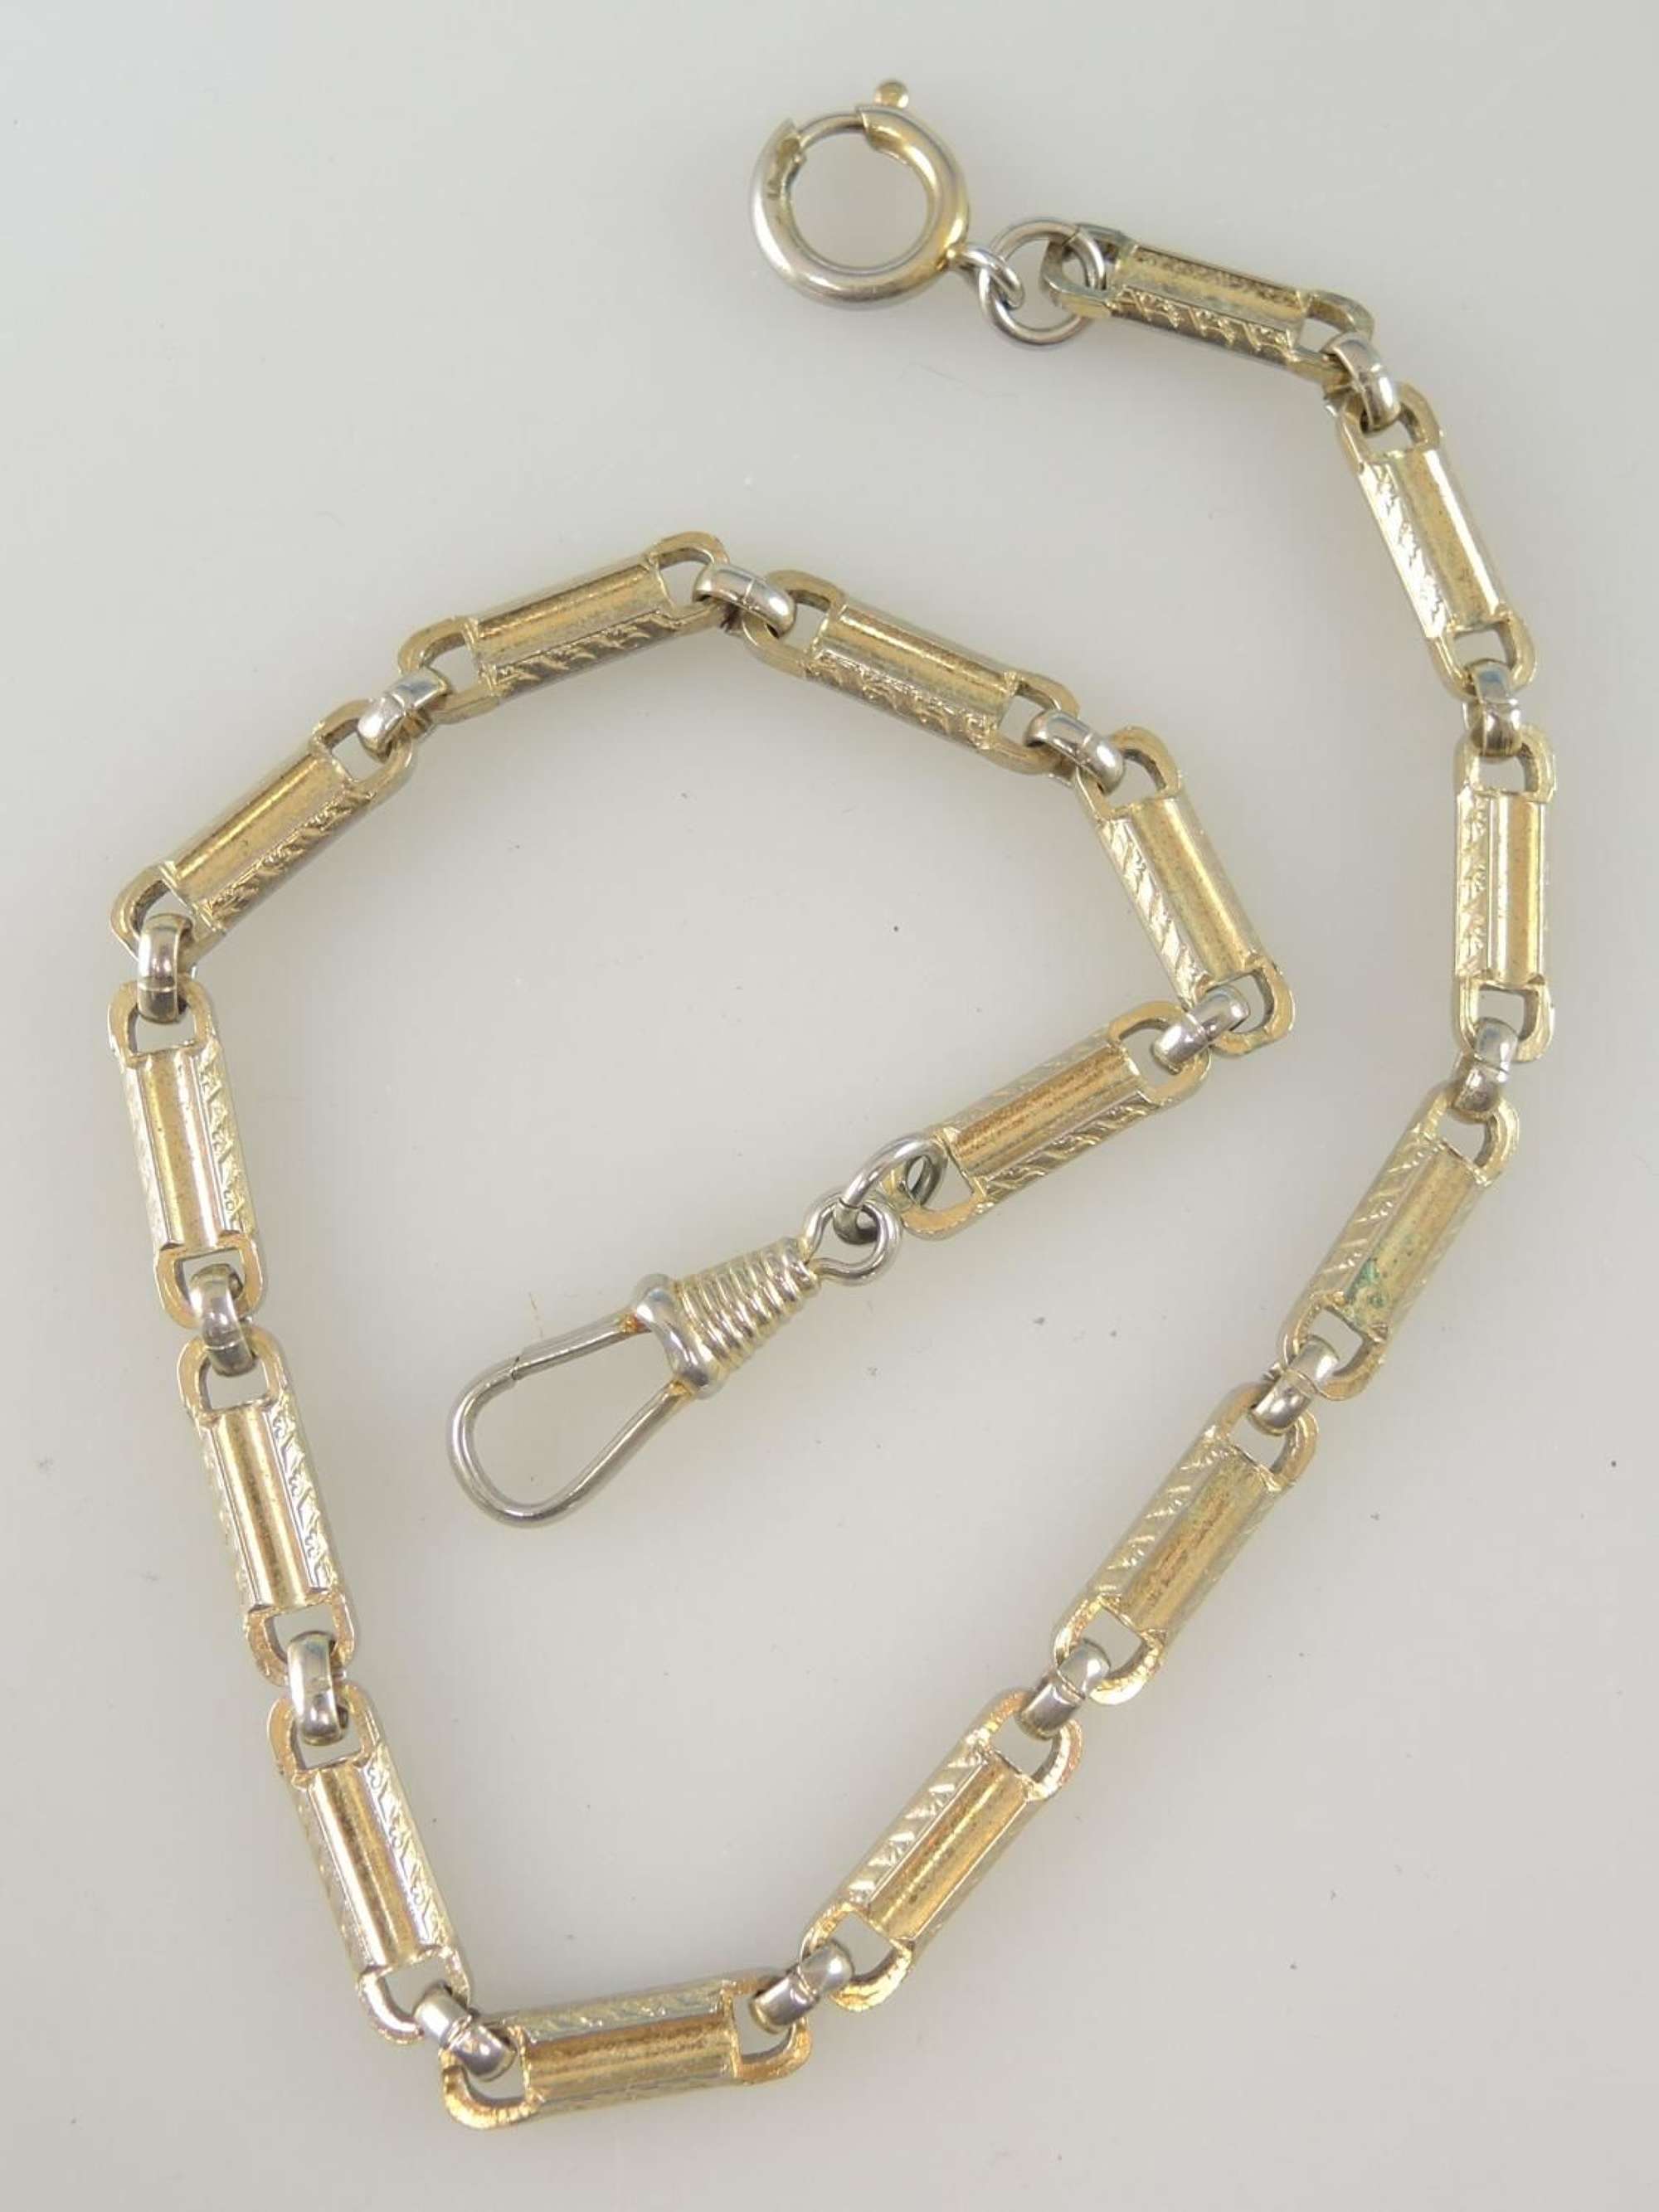 Fancy Gold Plated Watch Chain. Circa 1890